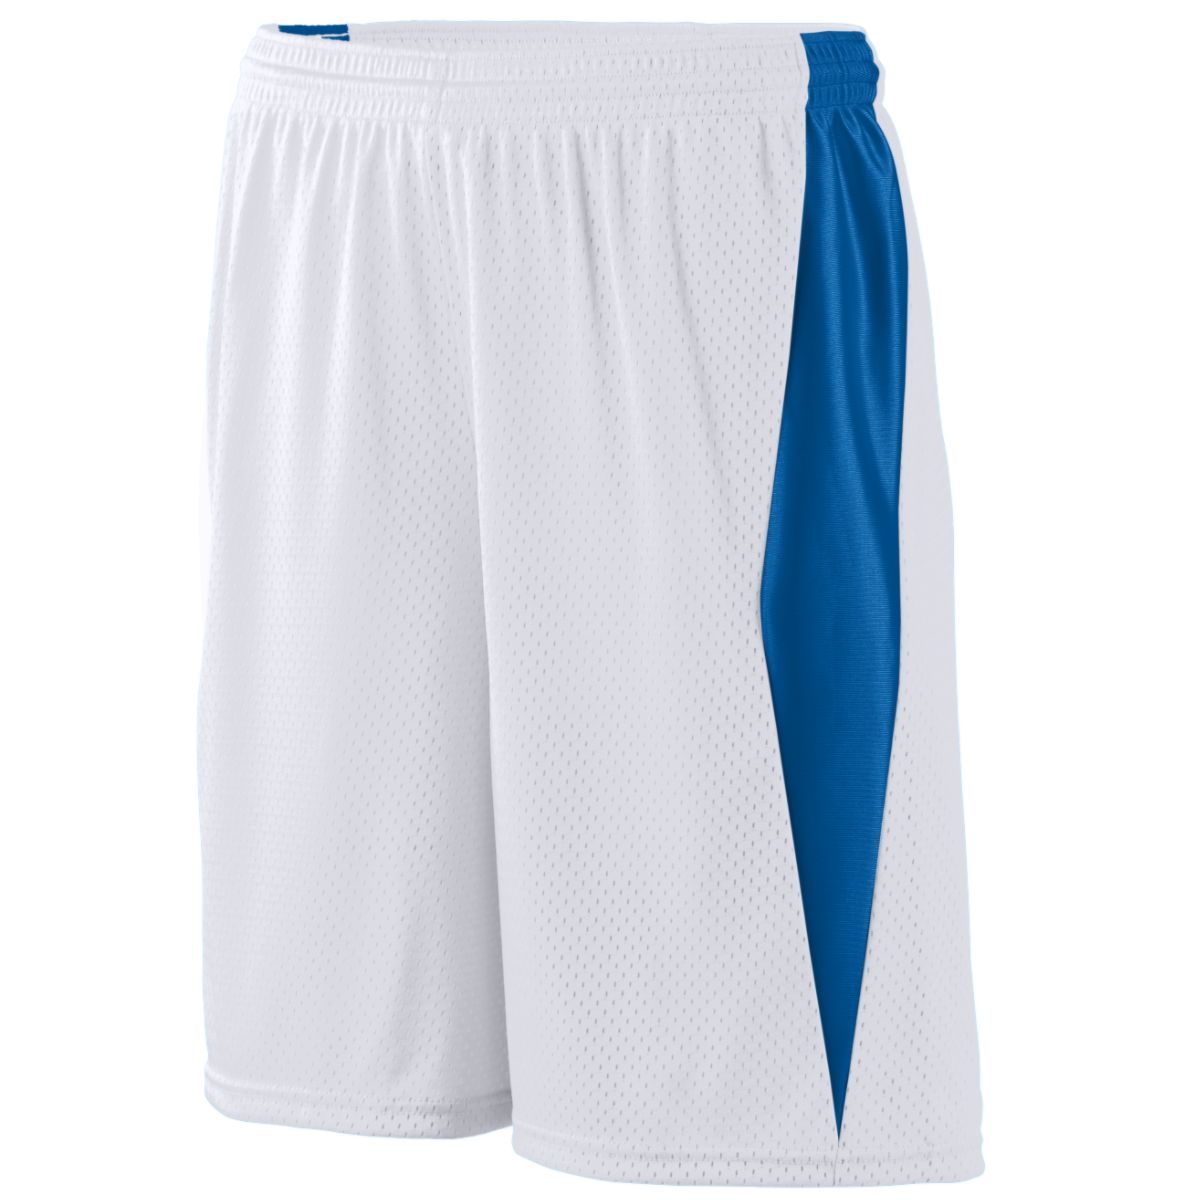 Augusta Sportswear Top Score Shorts in White/Royal  -Part of the Adult, Adult-Shorts, Augusta-Products, Lacrosse, All-Sports, All-Sports-1 product lines at KanaleyCreations.com